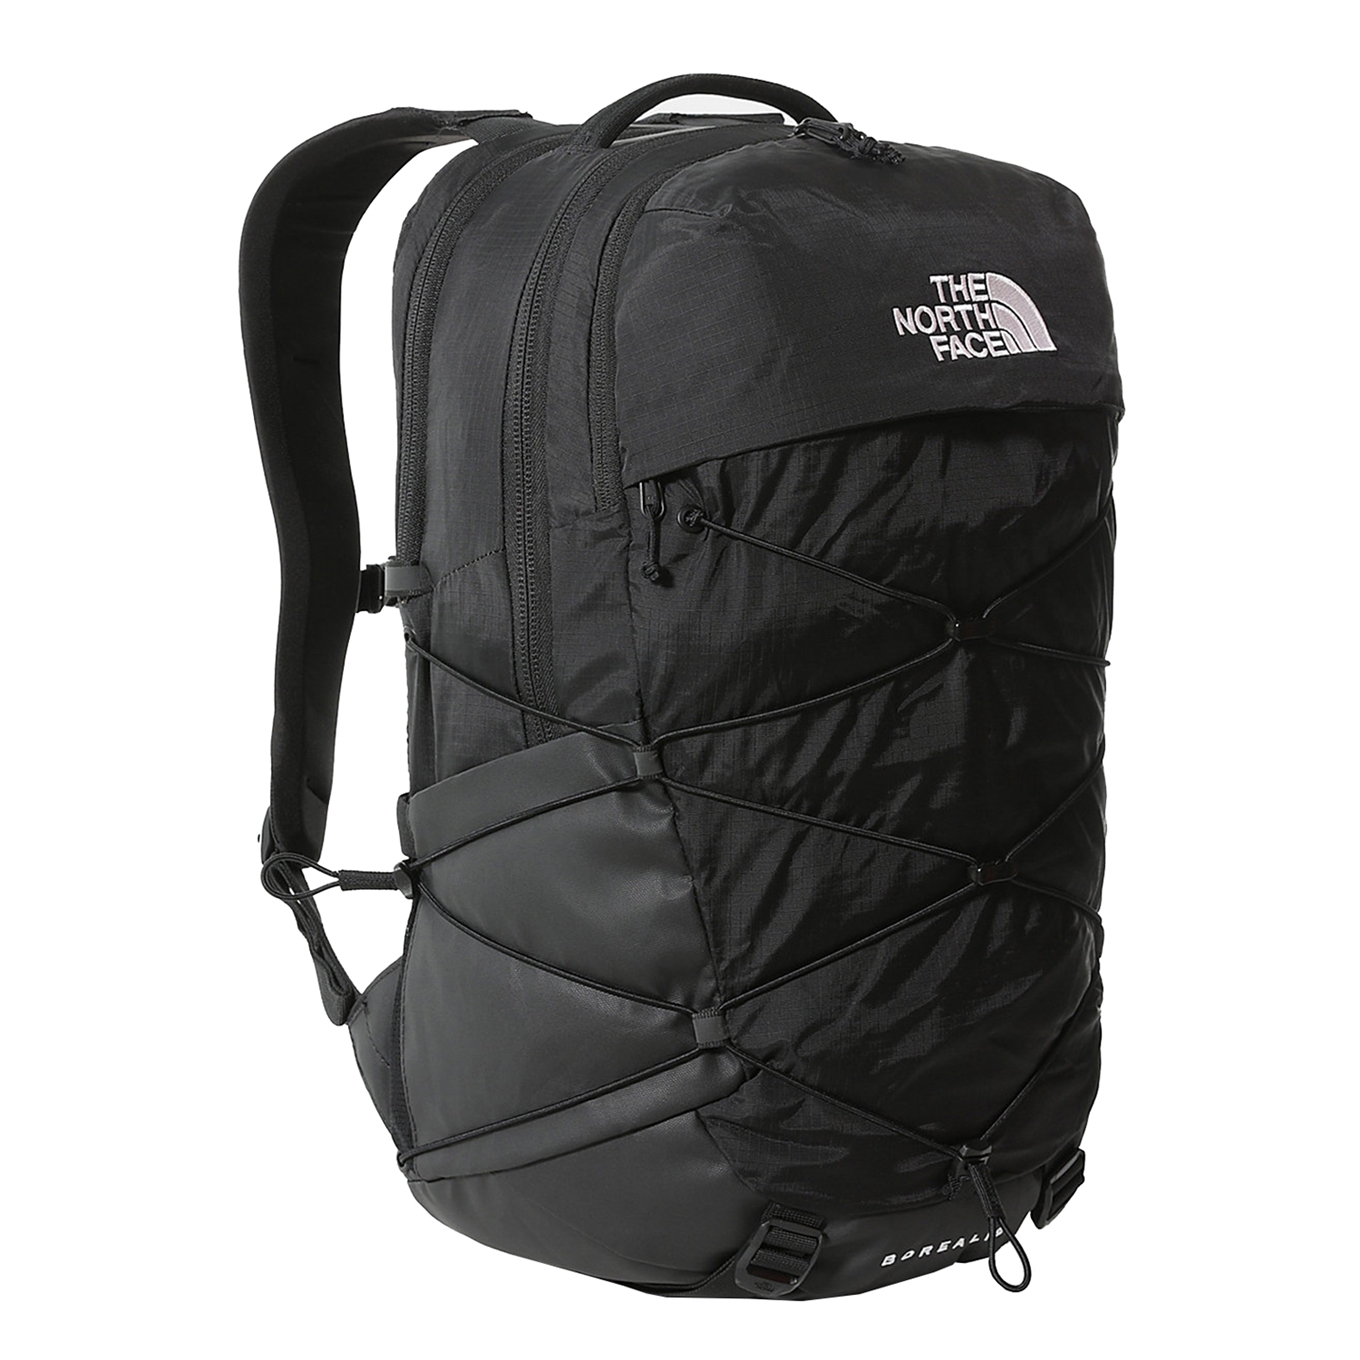 The North Face Borealis Backpack black backpack